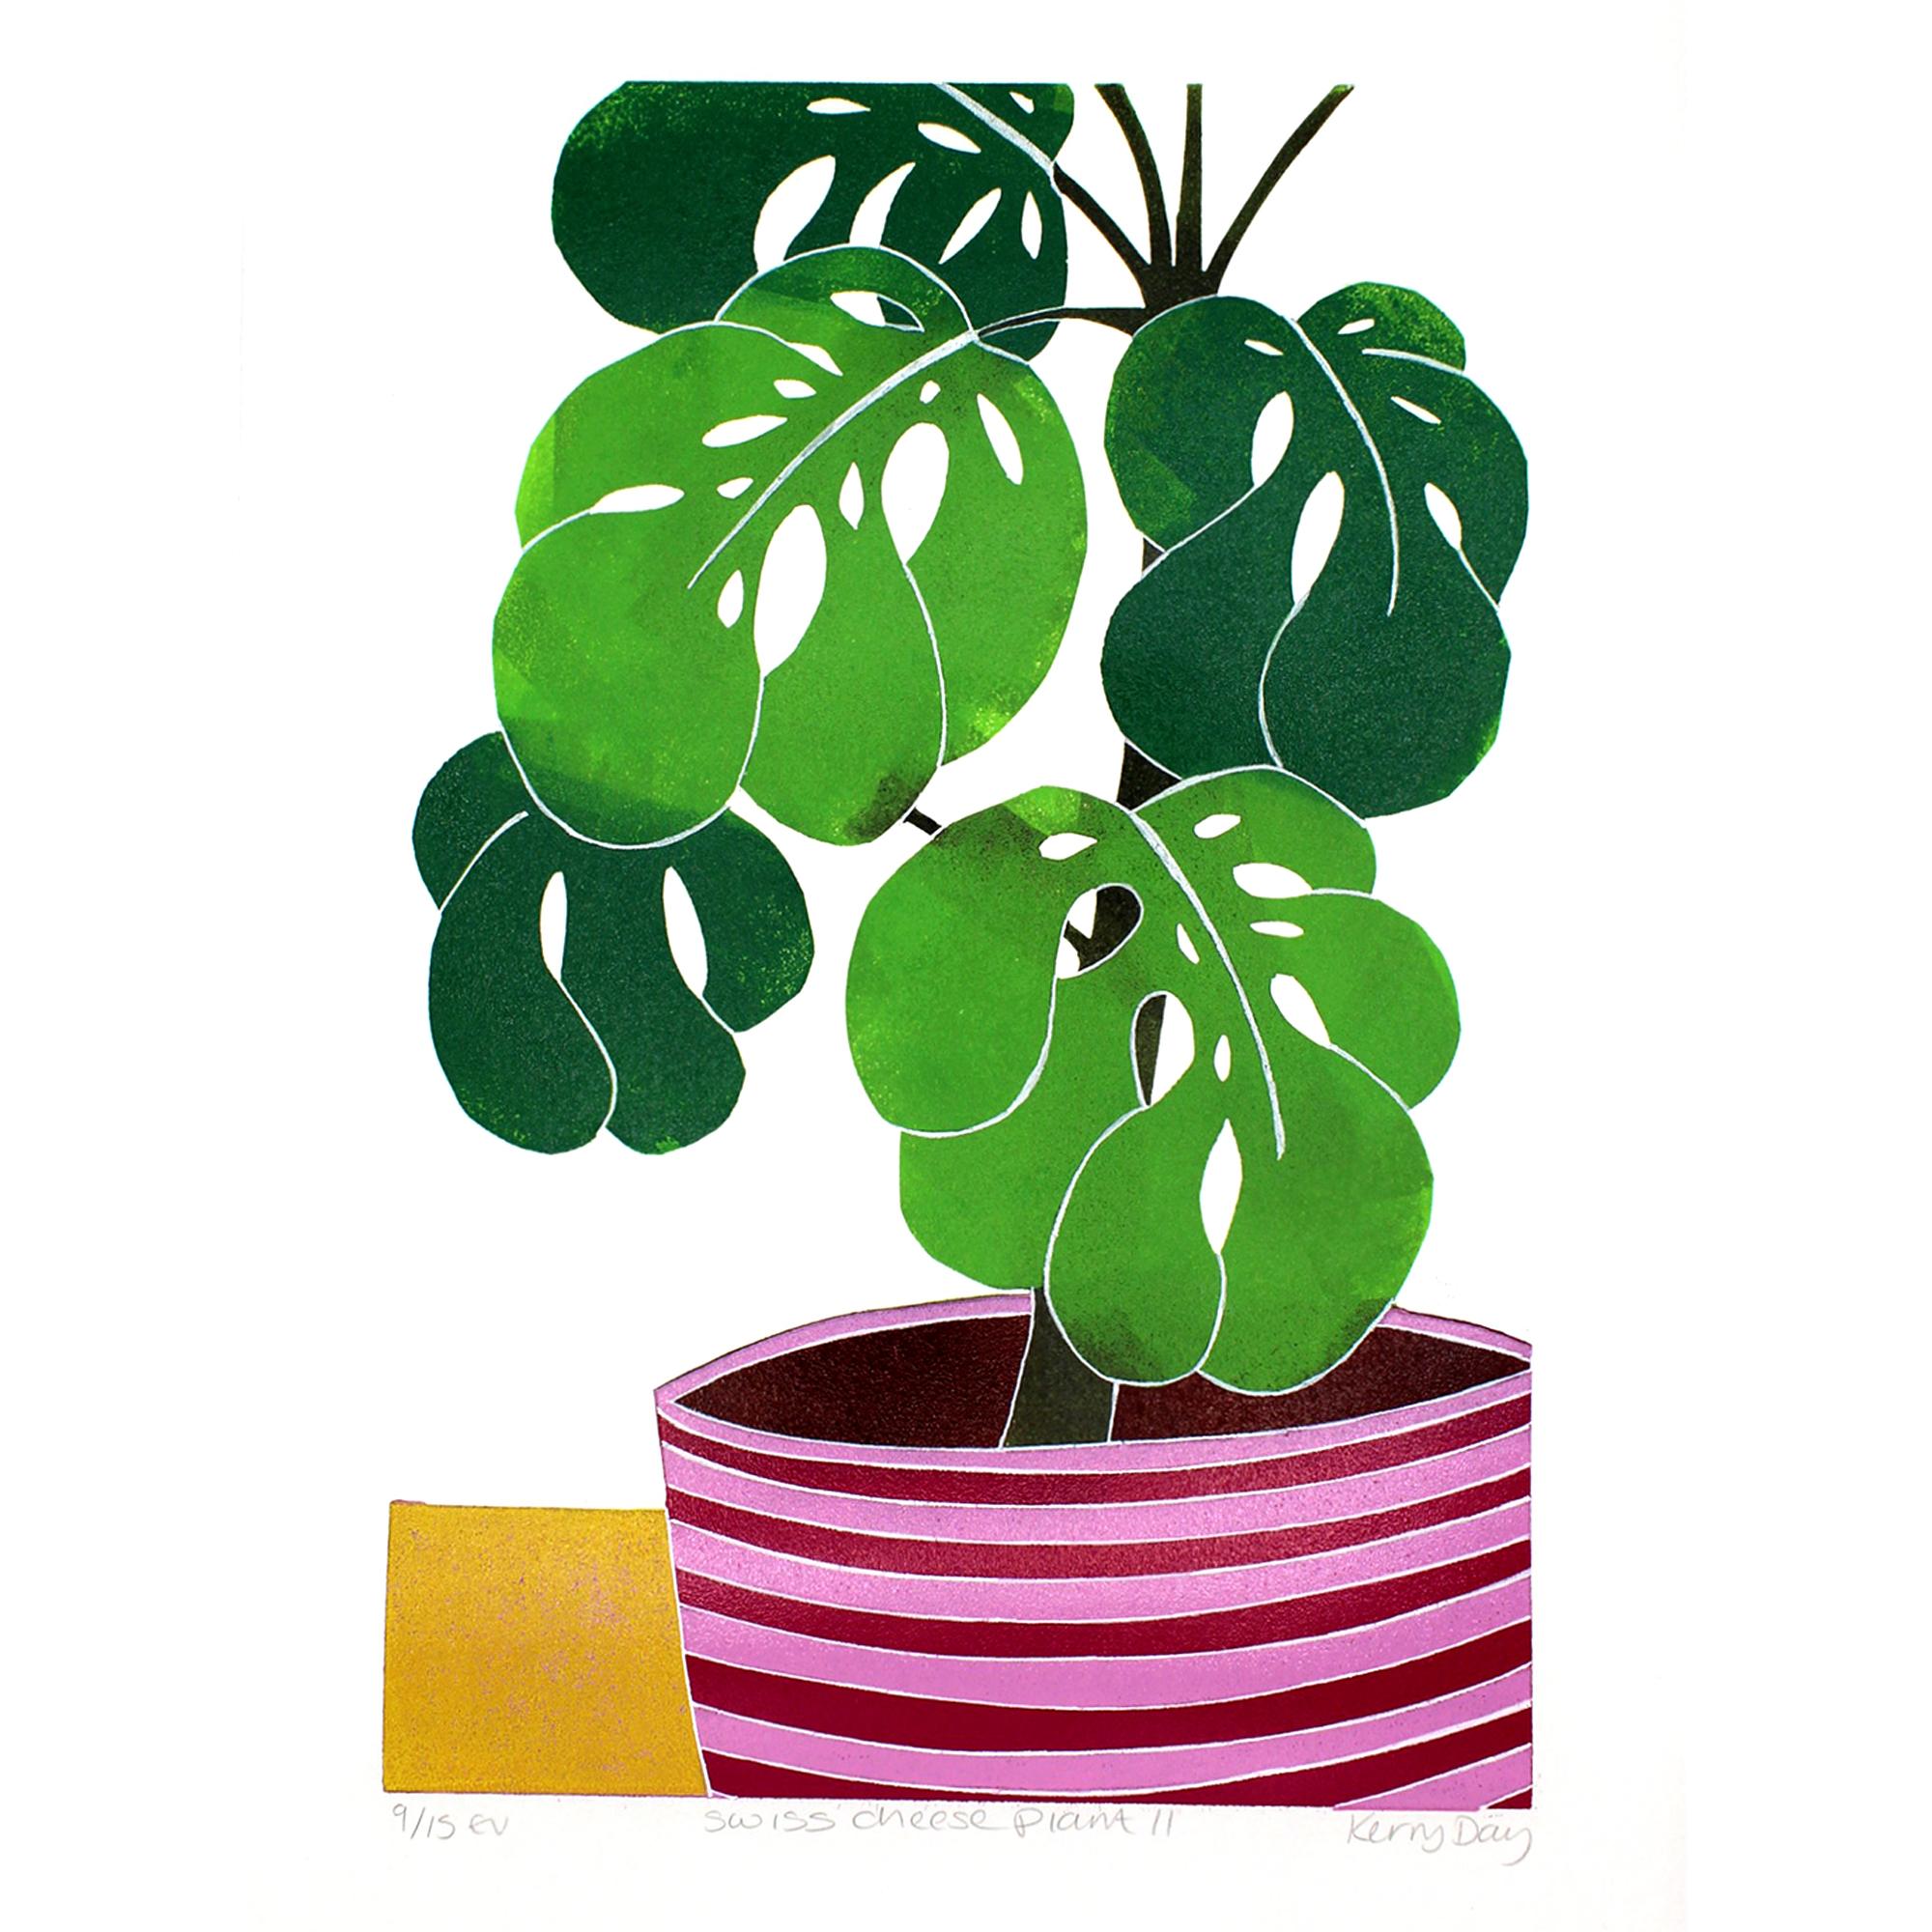 Swiss Cheese Plant II by Kerry Day [2021]
 
Swiss Cheese Plant II is a colourful Lino Print of the popular Monstera House Plant Printed by hand using the reduction print method, with 9 layers, in an varied limited edition of 15 Printed on onto